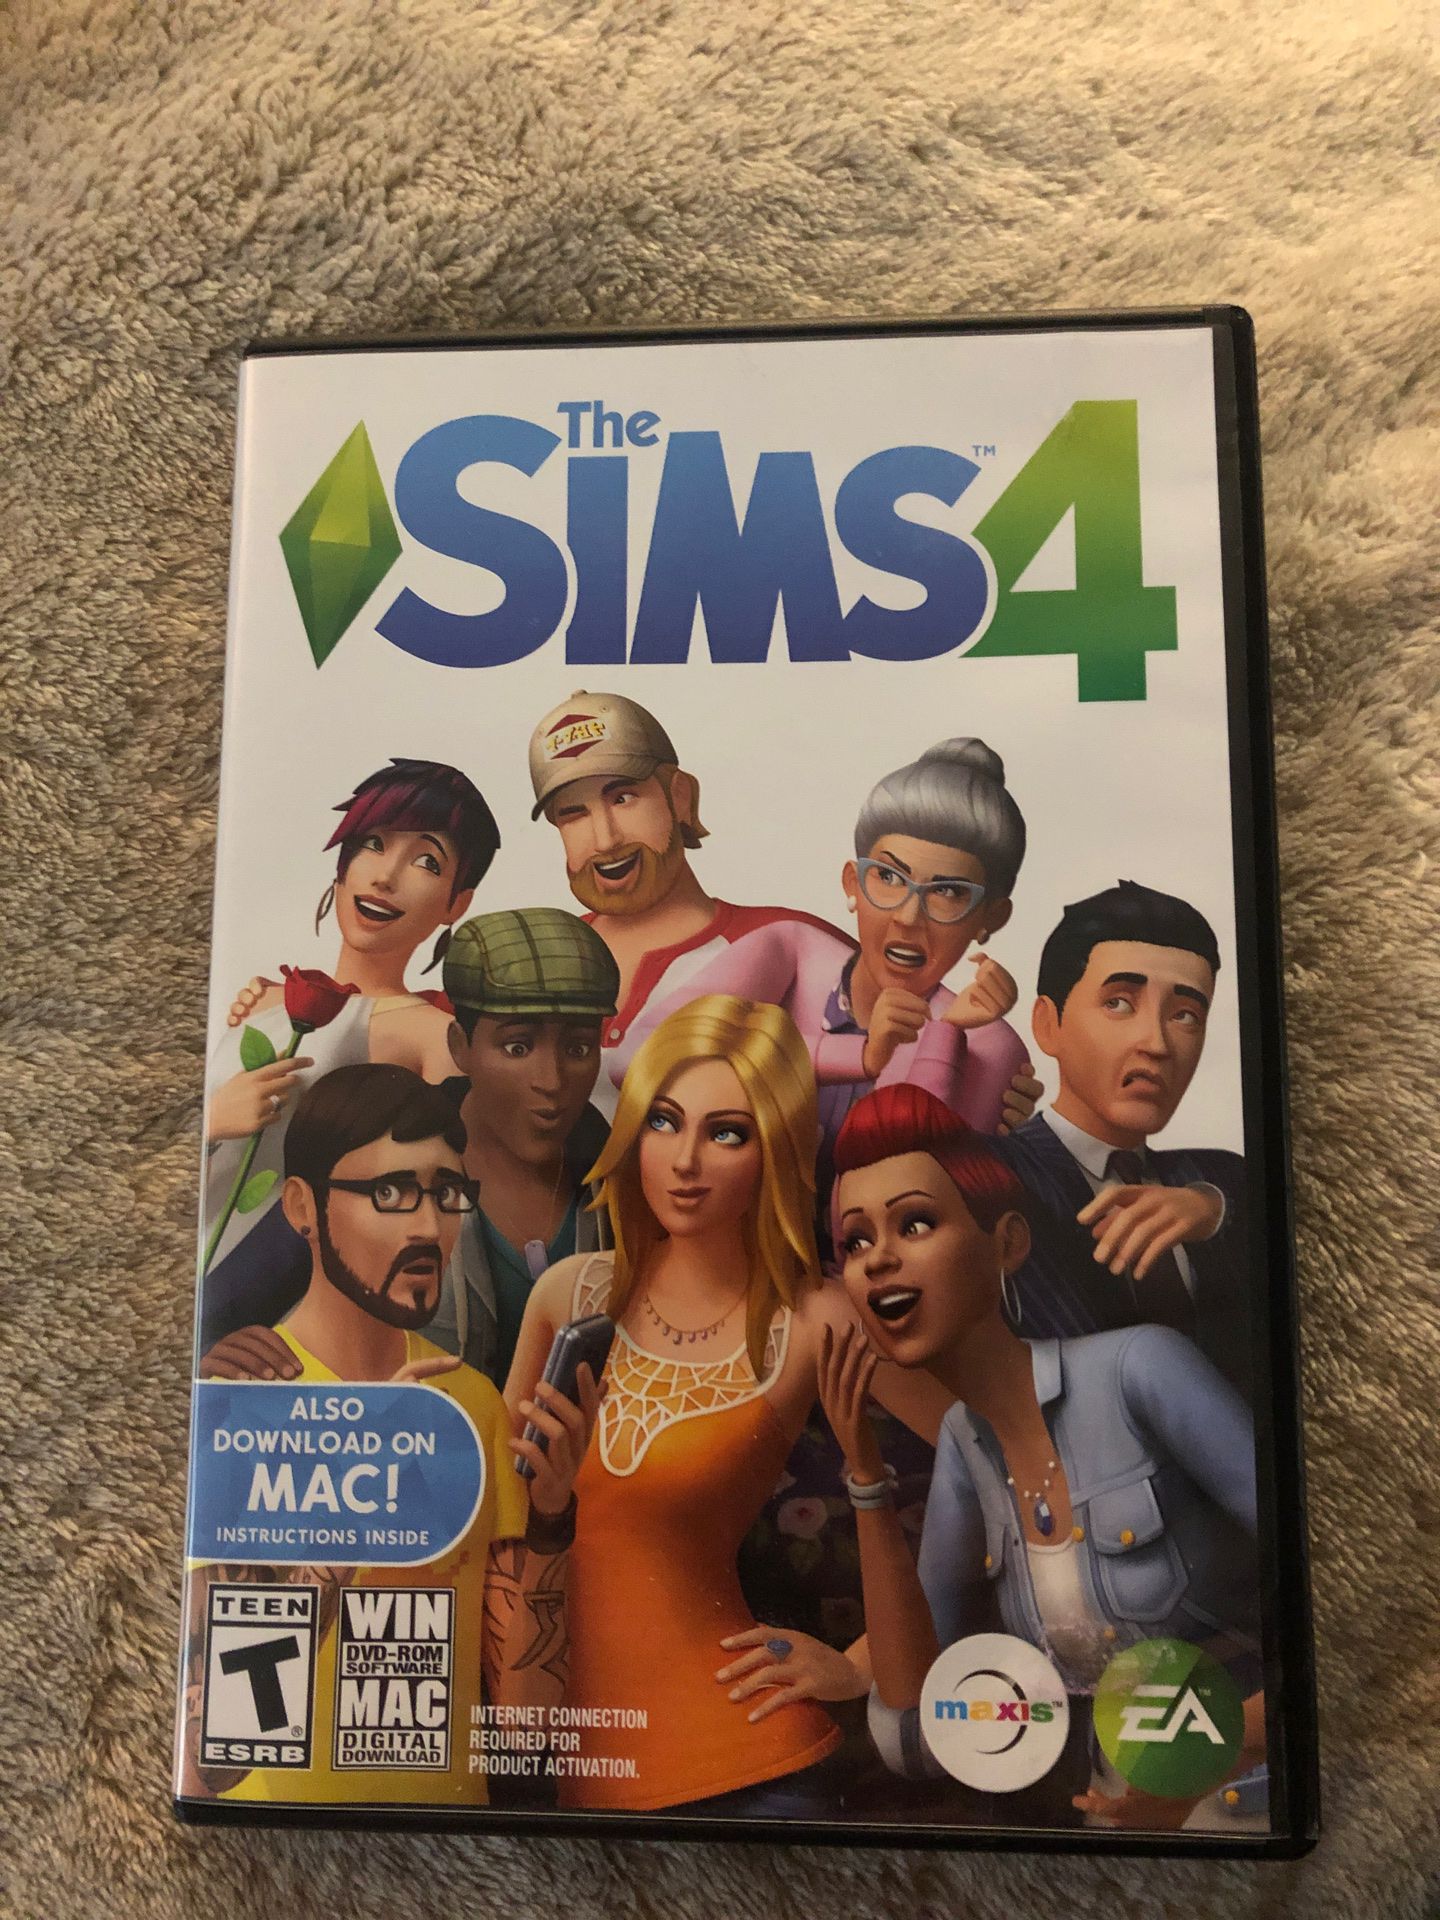 Sims 4 for PC/Mac